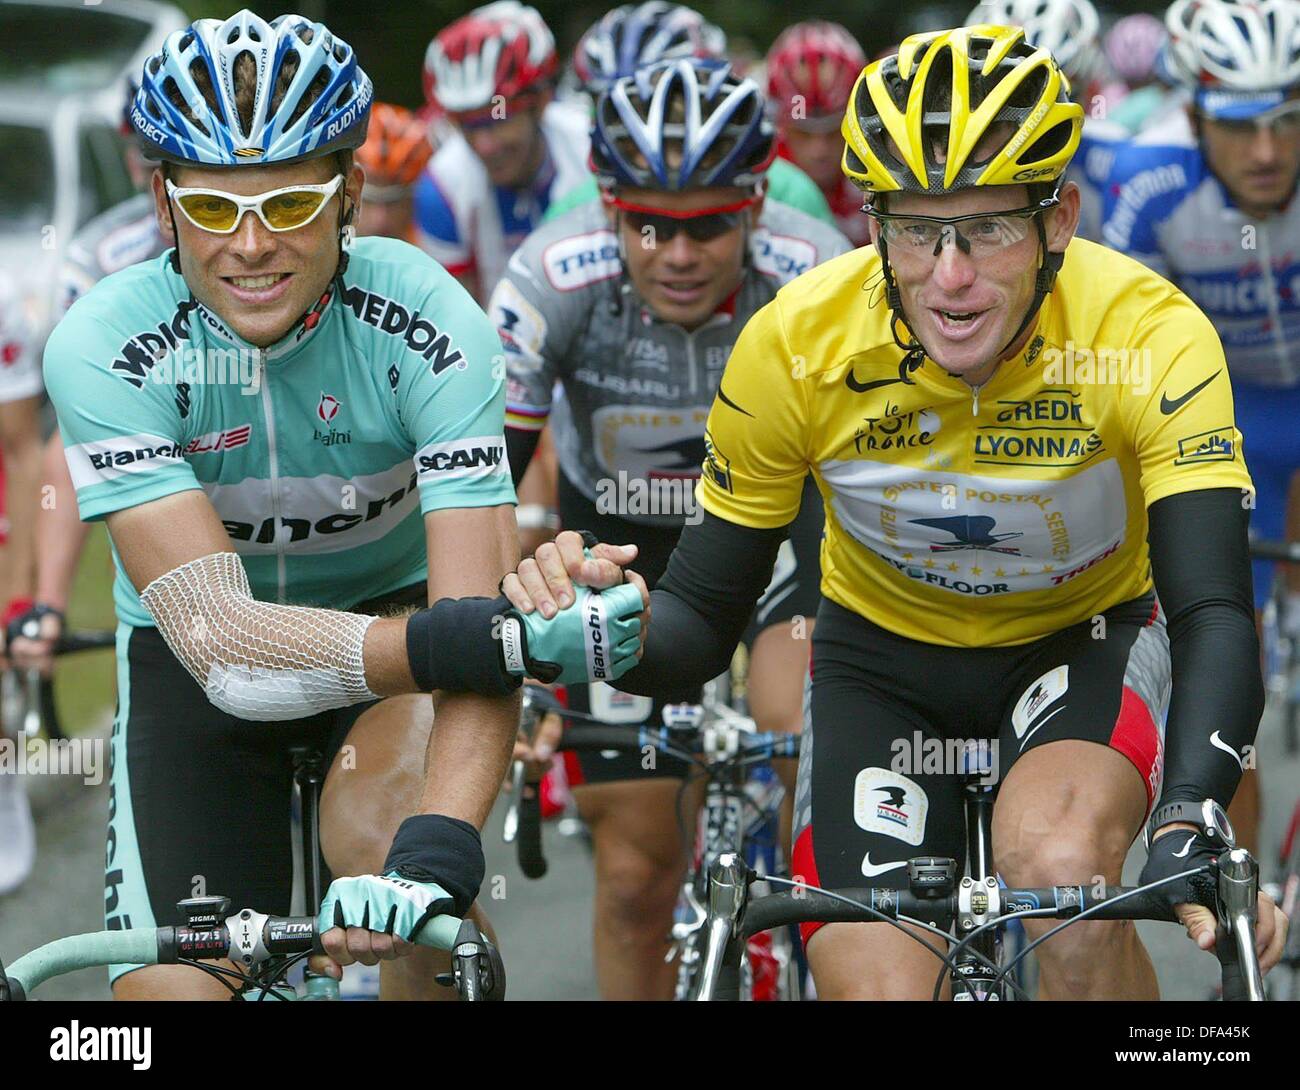 (dpa) - German Jan Ullrich (L) of Team Bianchi congratulates US Postal-Berry Floor's Lance Armstrong from the US, who wears the overall leader's yellow jersey, during the 20th stage of the 2003 Tour de France cycling race in Ville-d'Avray, France, 27 July 2003. In the backgournd Russia's Vjatceslav Ekimov. The race's final stage to Paris is traditionally a ceremonial ride in which no one challenges the overall lead. So barring disaster, Armstrong will match Miguel Indurain's record of five consecutive victories in cycling's most prestigious event. Ullrich is placed second in the general standi Stock Photo